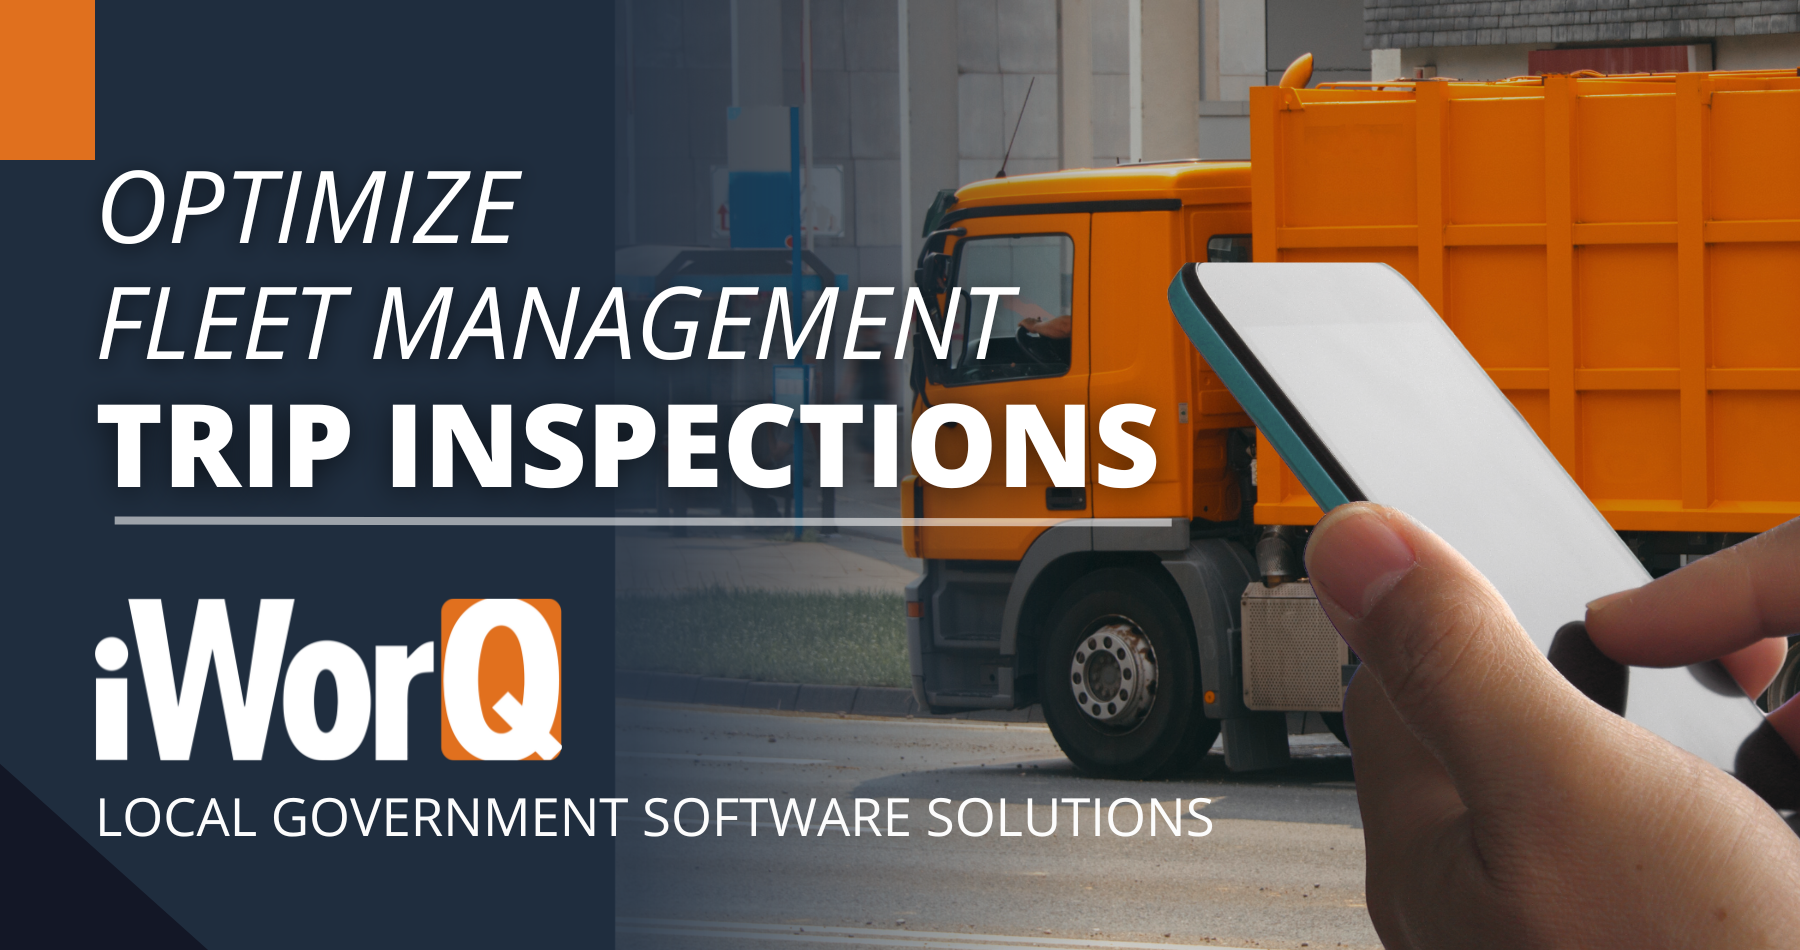 Featured image for “Optimize Fleet Management Trip Inspections”